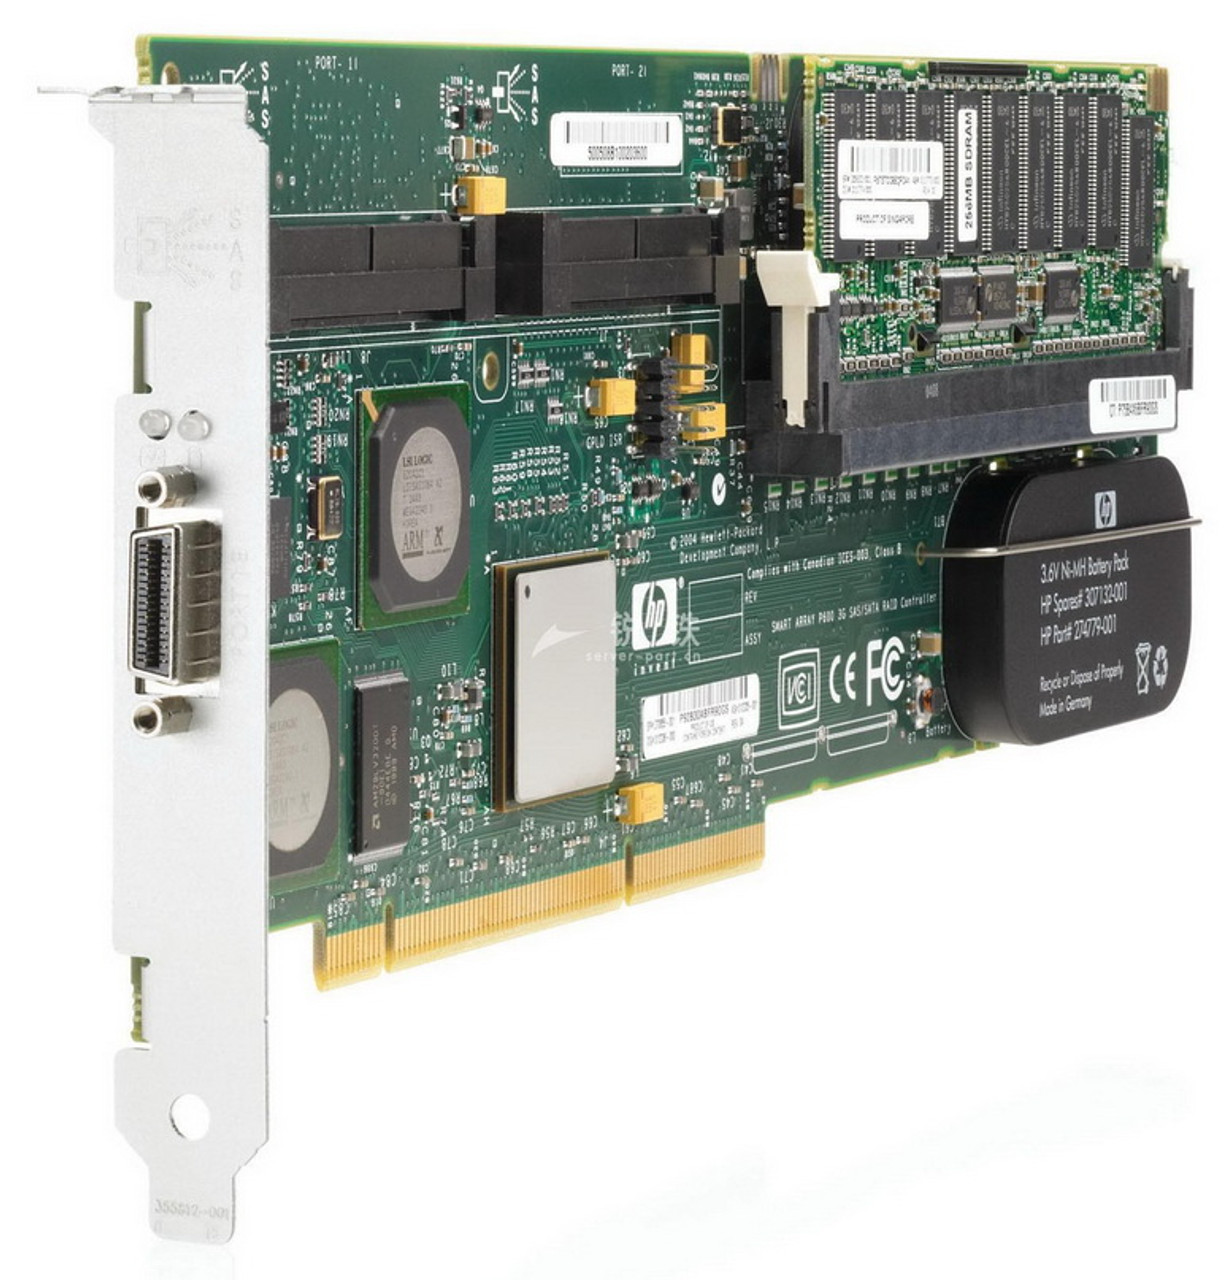 HP Smart Array P600 PCI-X 8-Channel 64-Bit SAS RAID Controller Card with 256MB Battery Backed Write Cache (BBWC) Mfr P/N 337972-B21R